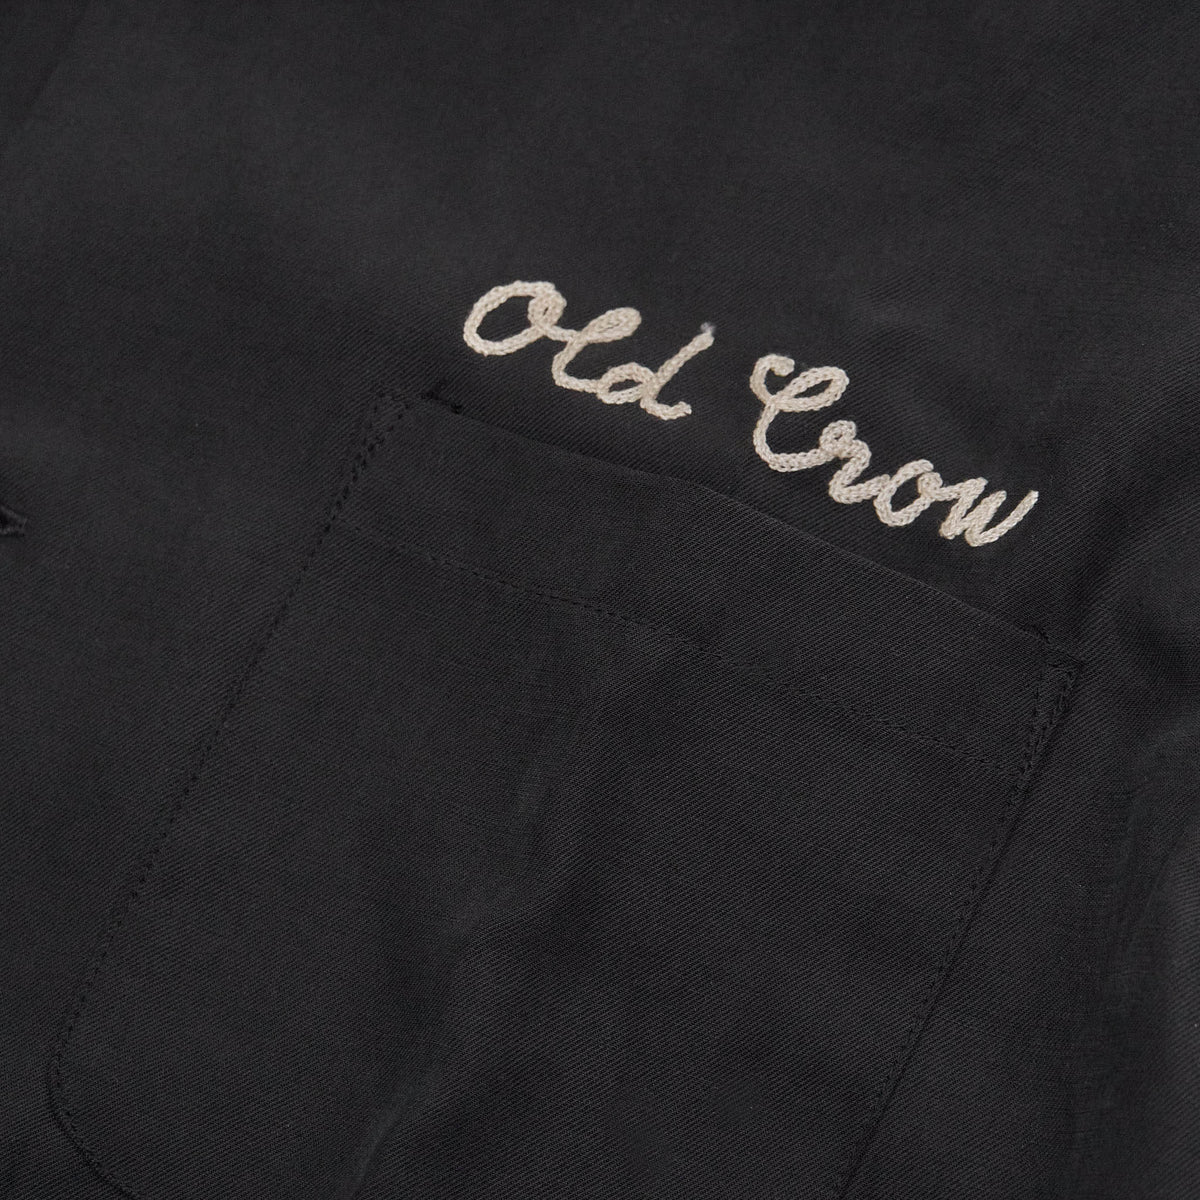 Old Crow Speed Shop by Glad Hand &amp; Co. Hot Rod Garage Shirt